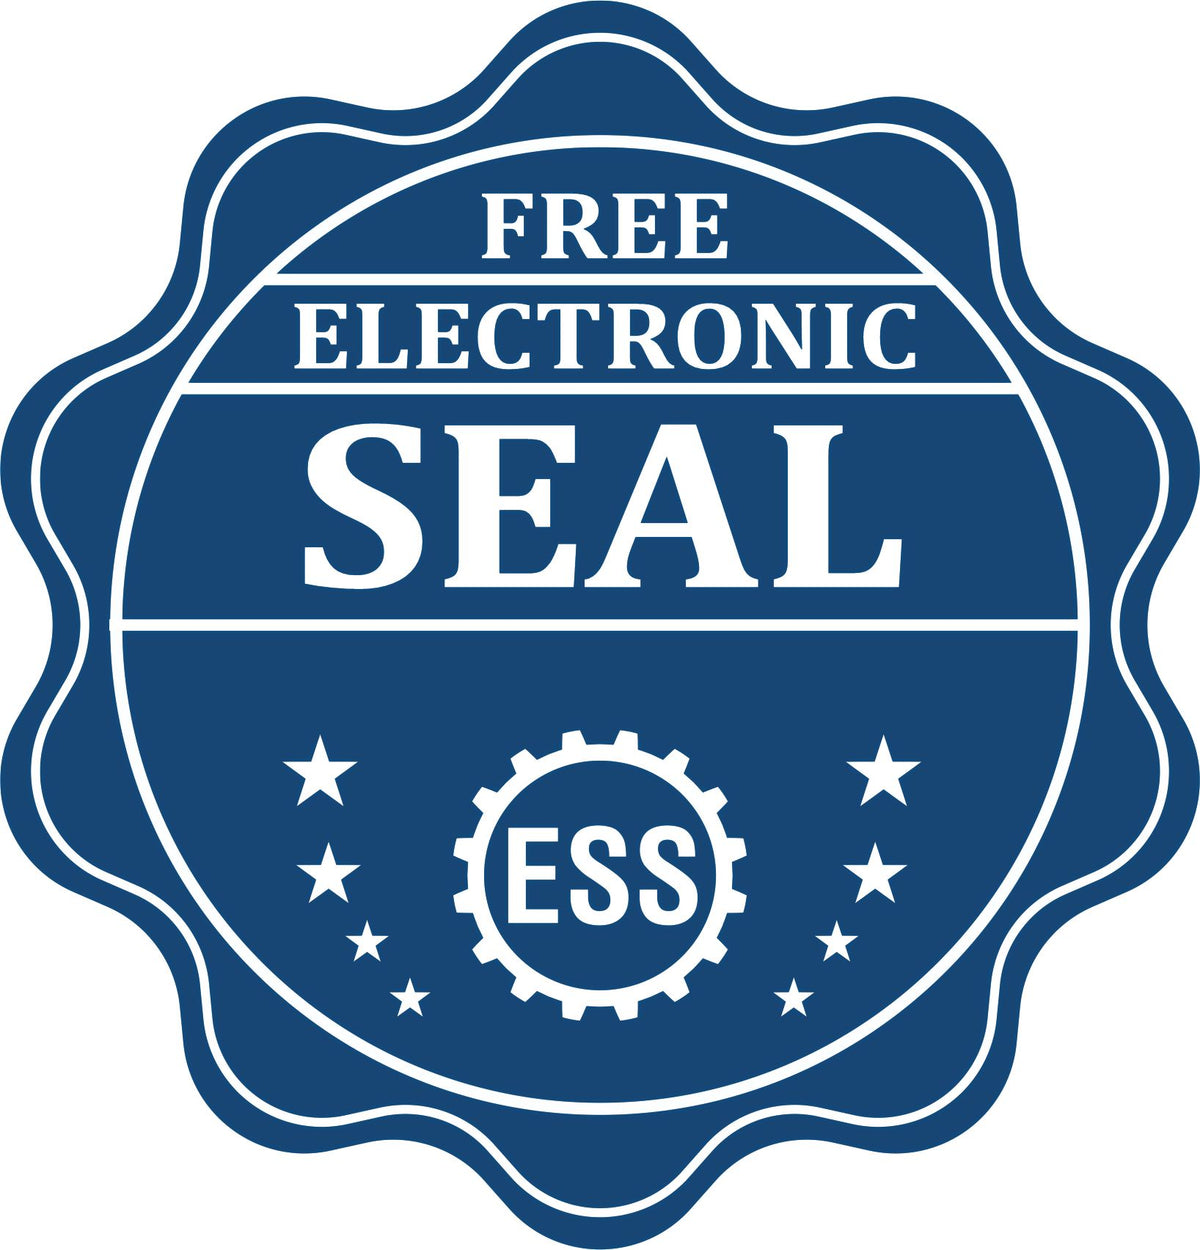 A badge showing a free electronic seal for the Handheld New Mexico Architect Seal Embosser with stars and the ESS gear on the emblem.